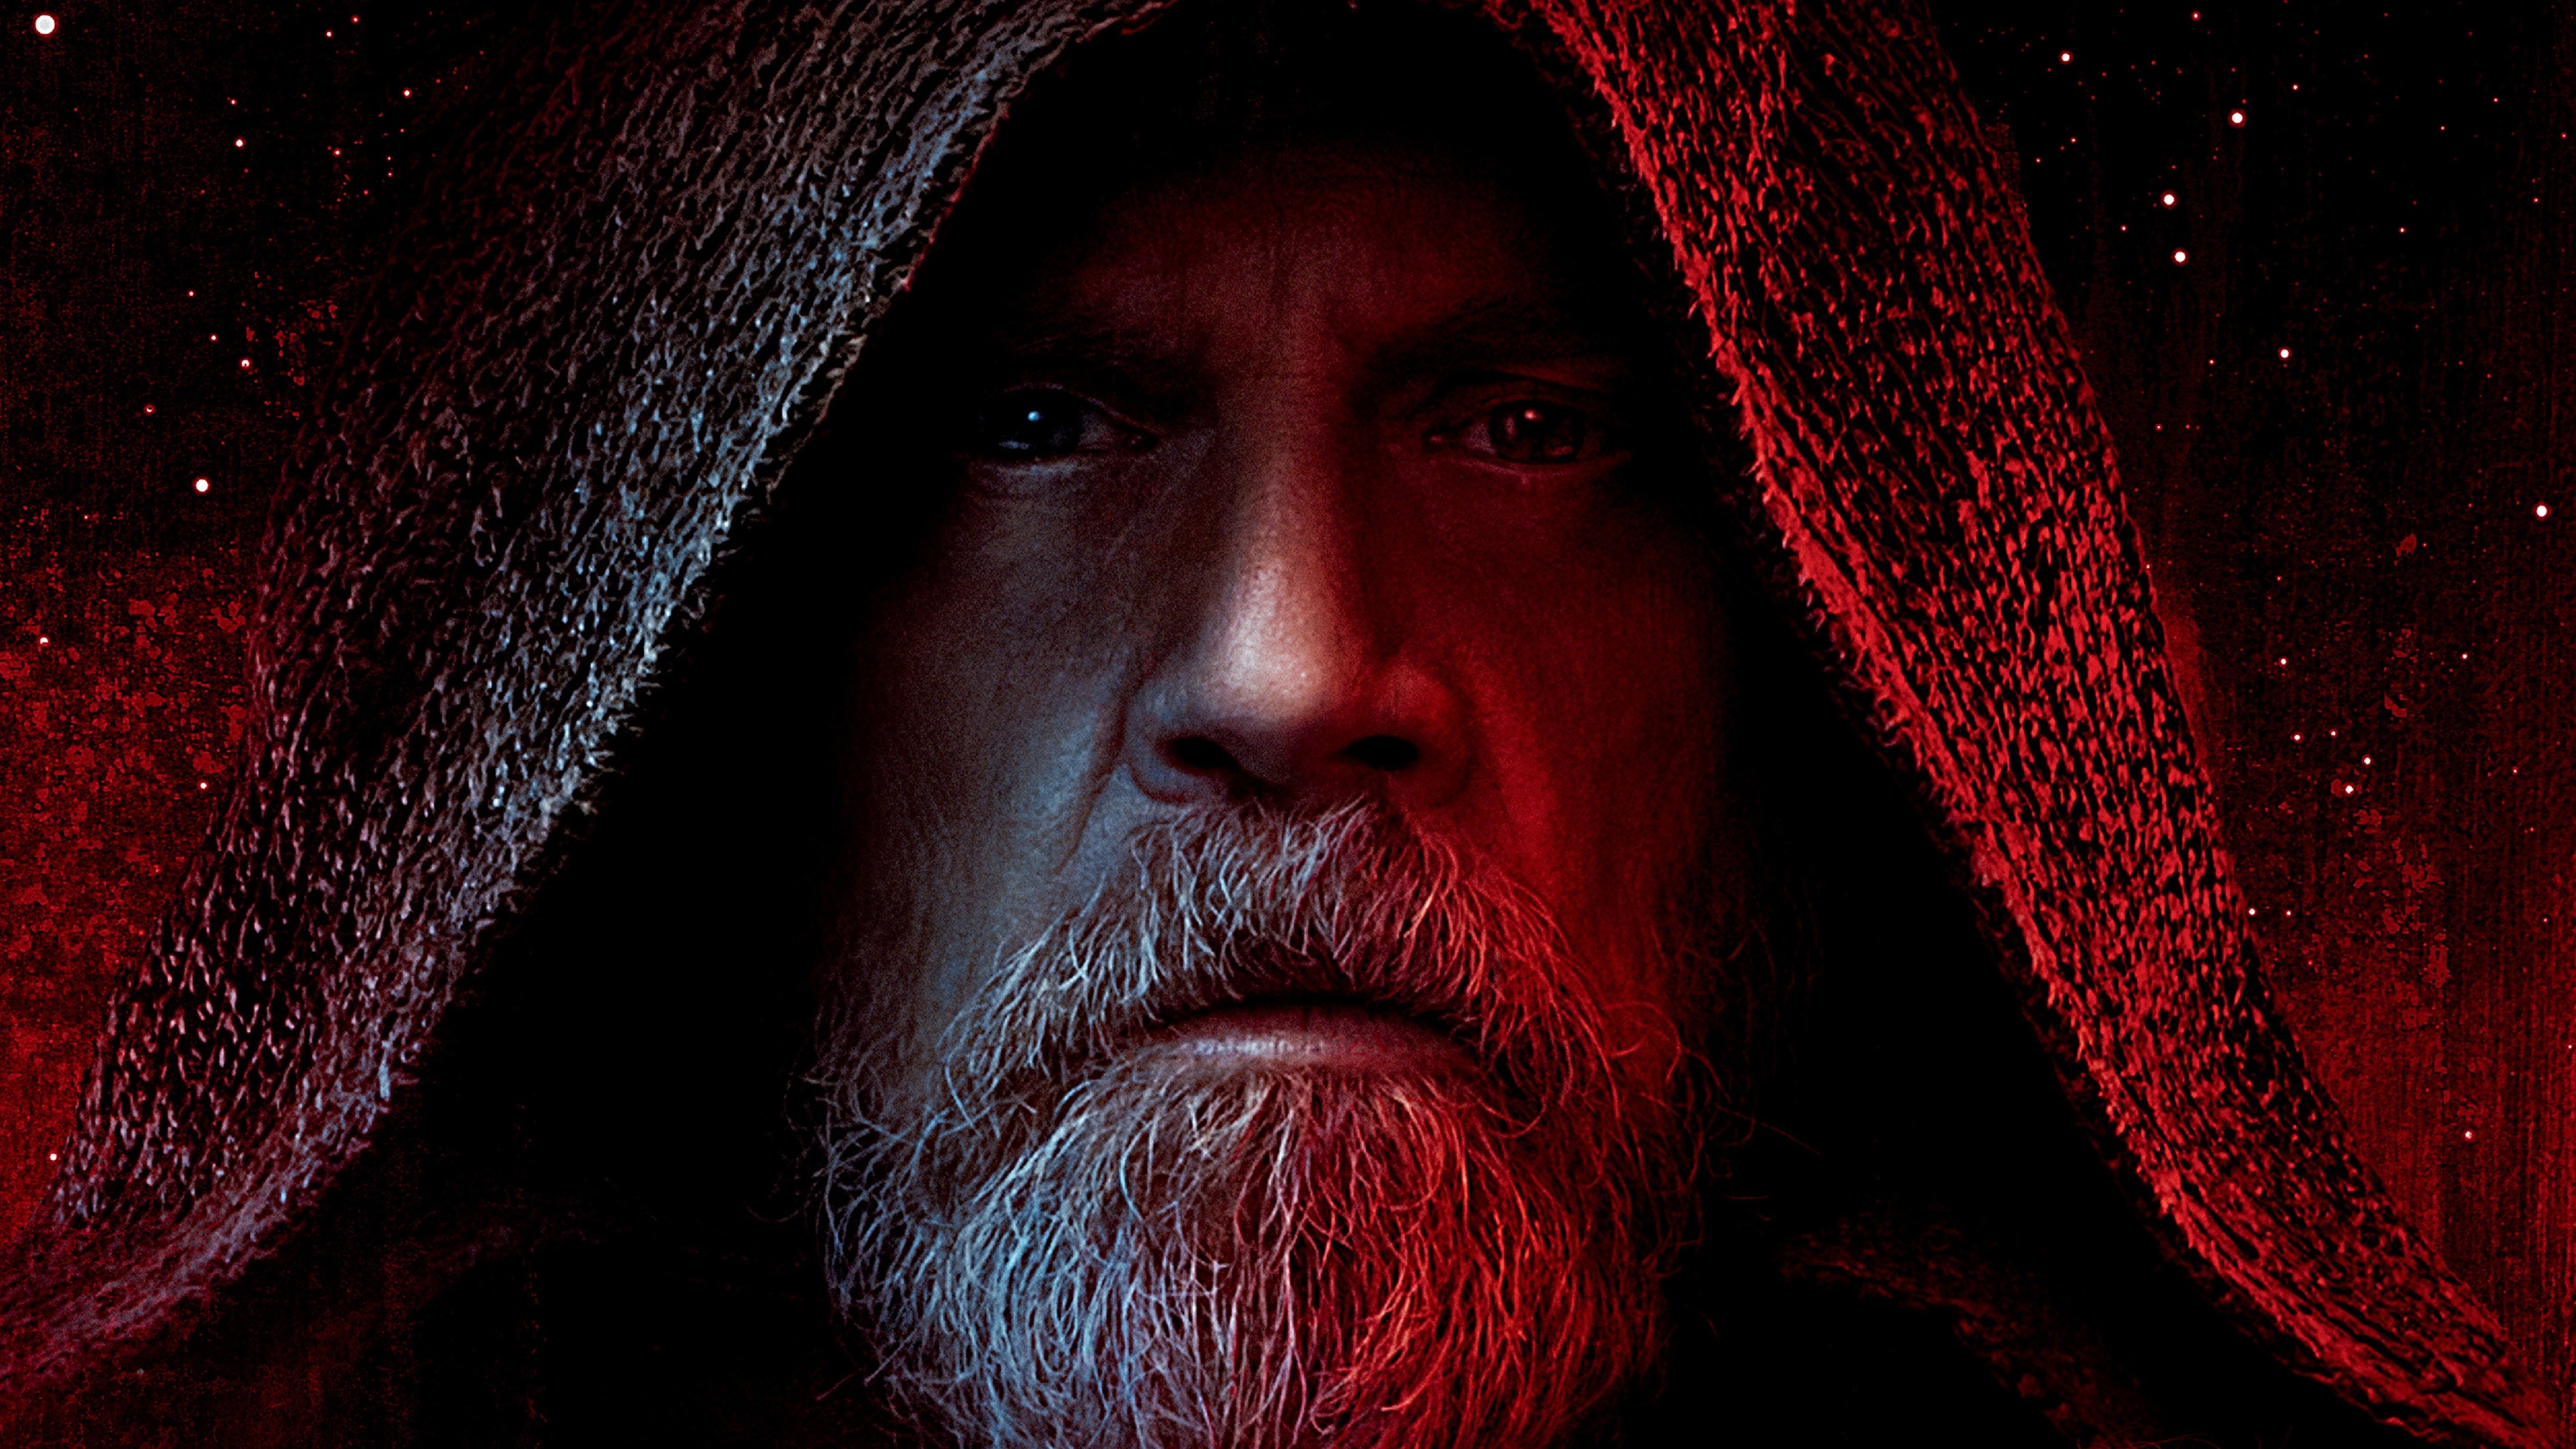 Mark Hamill, High-definition wallpapers, Movie background images, 3840x2160 4K Desktop